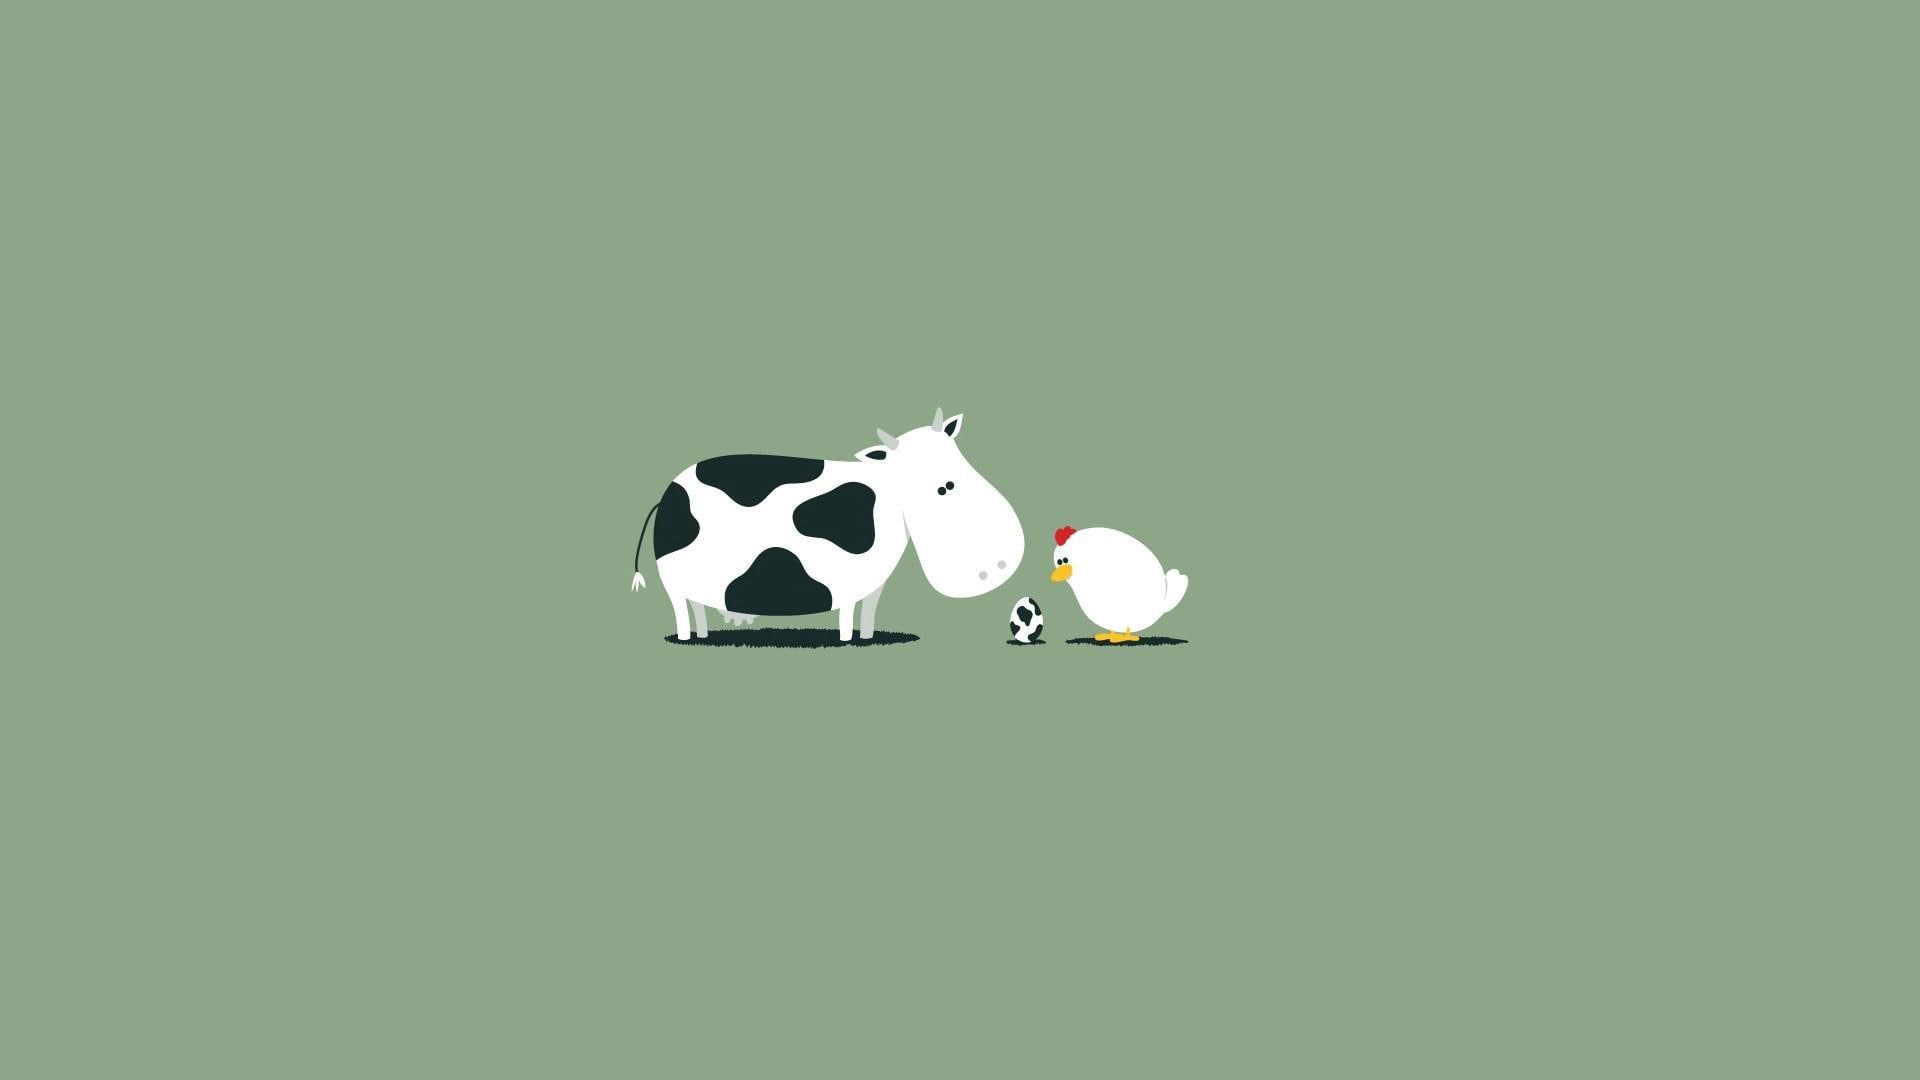 Cow wallpaper, chicken and the egg, cow and hen illustration, funny, 1920x1080